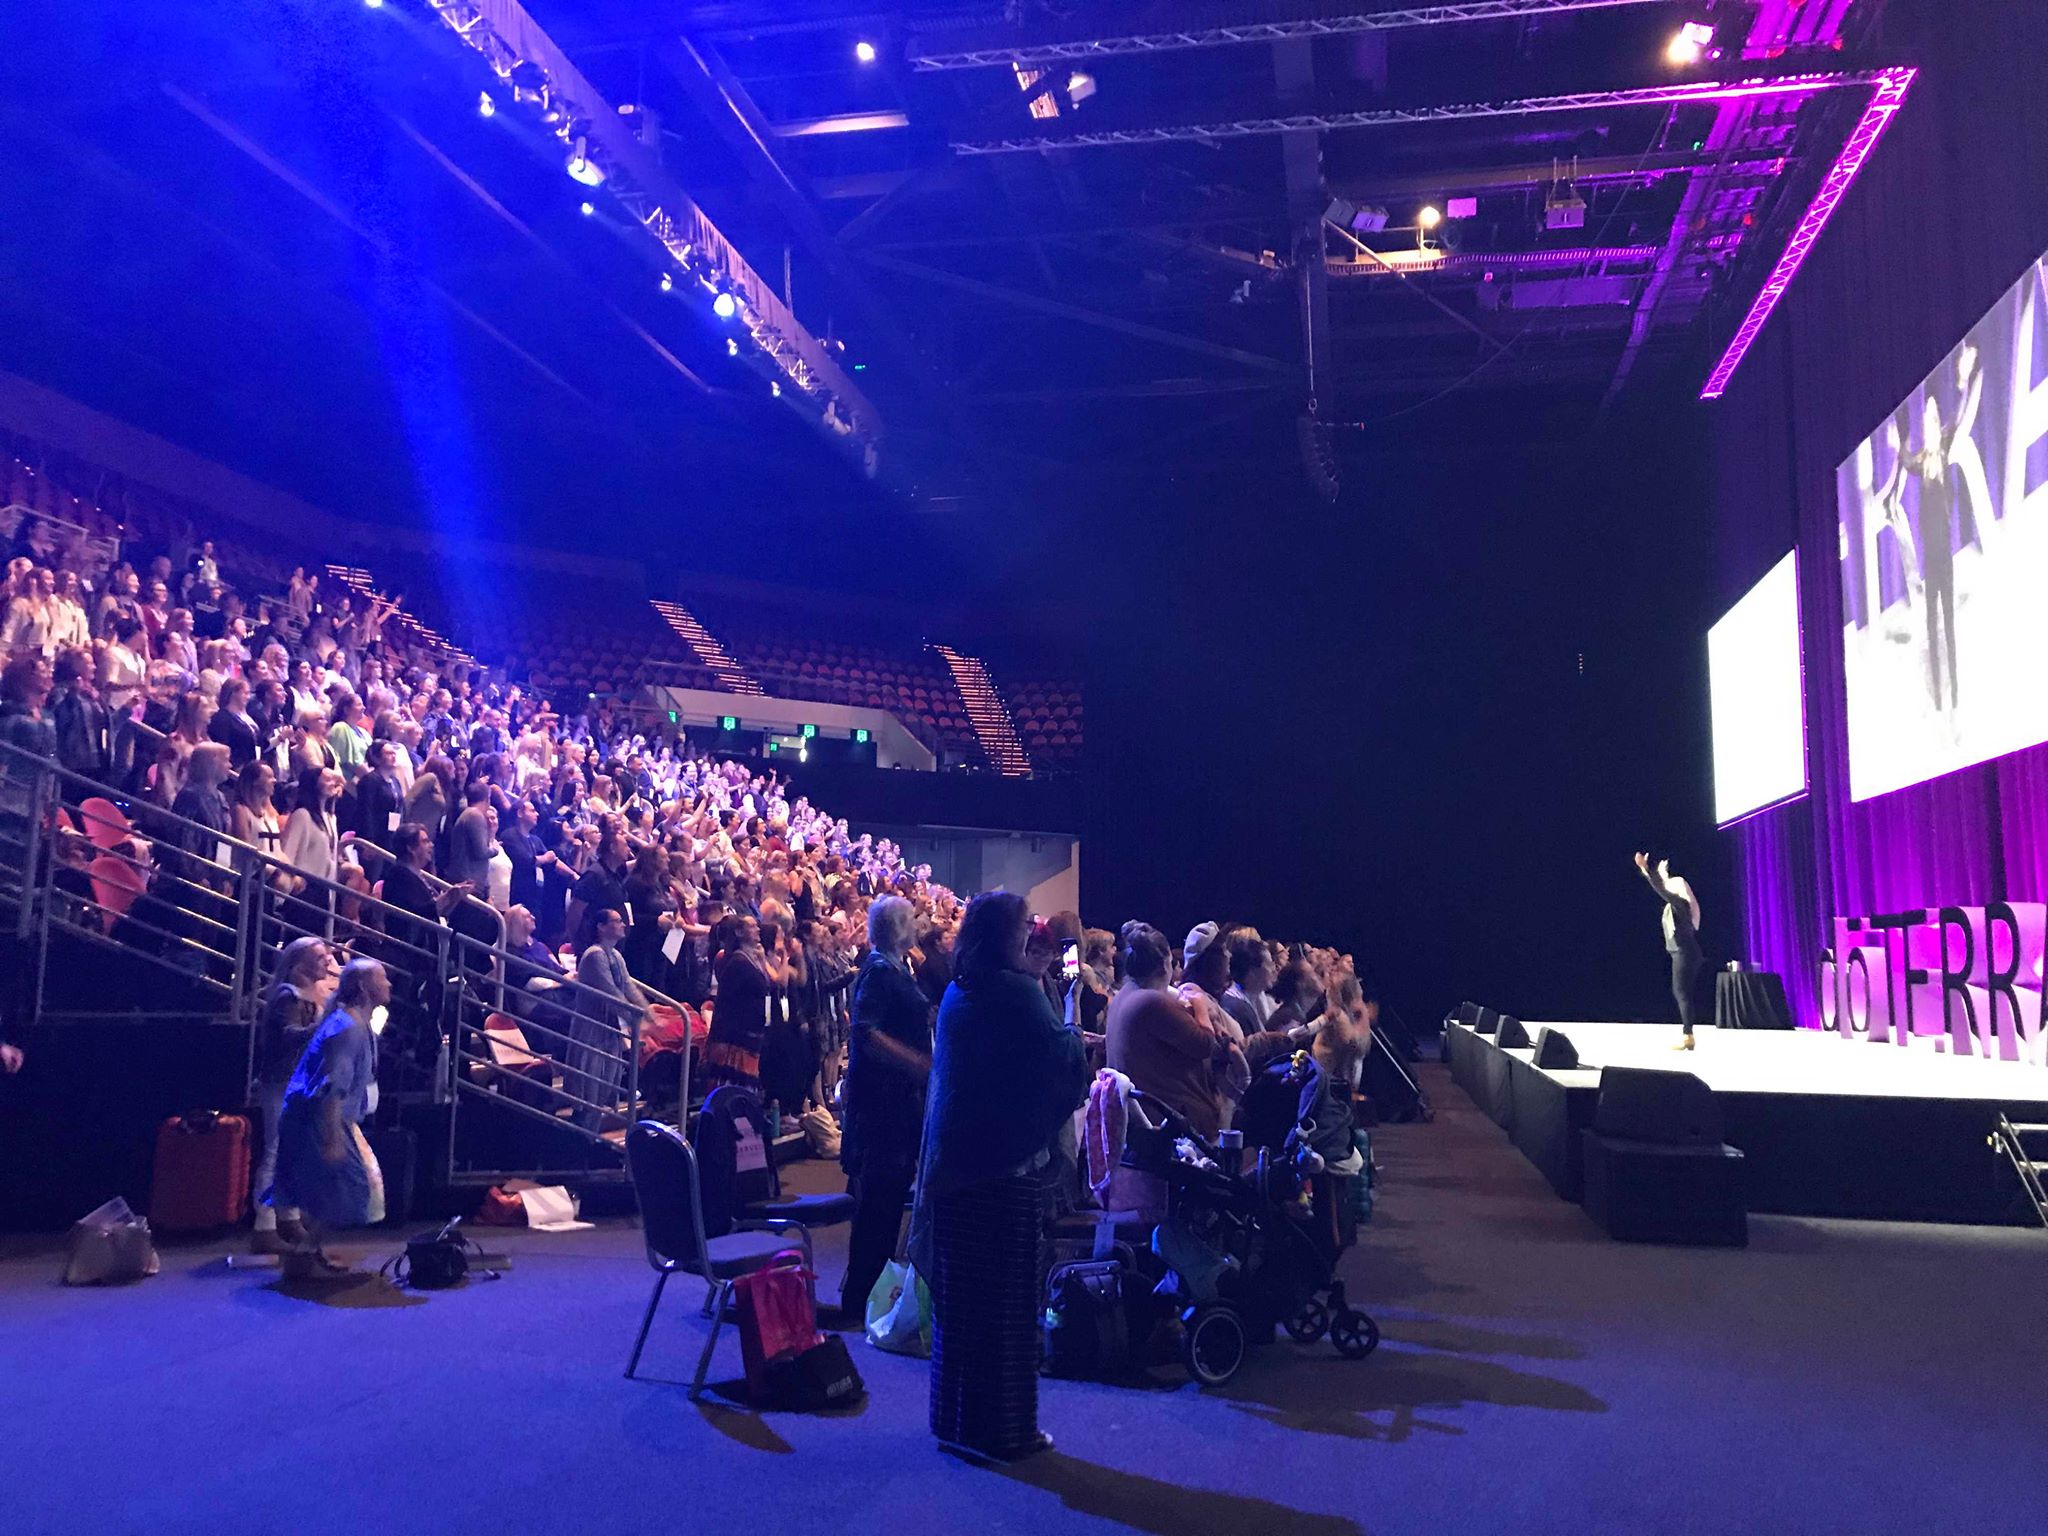 10 Things I learnt from a doTerra Conference about How to Change the Building Industry